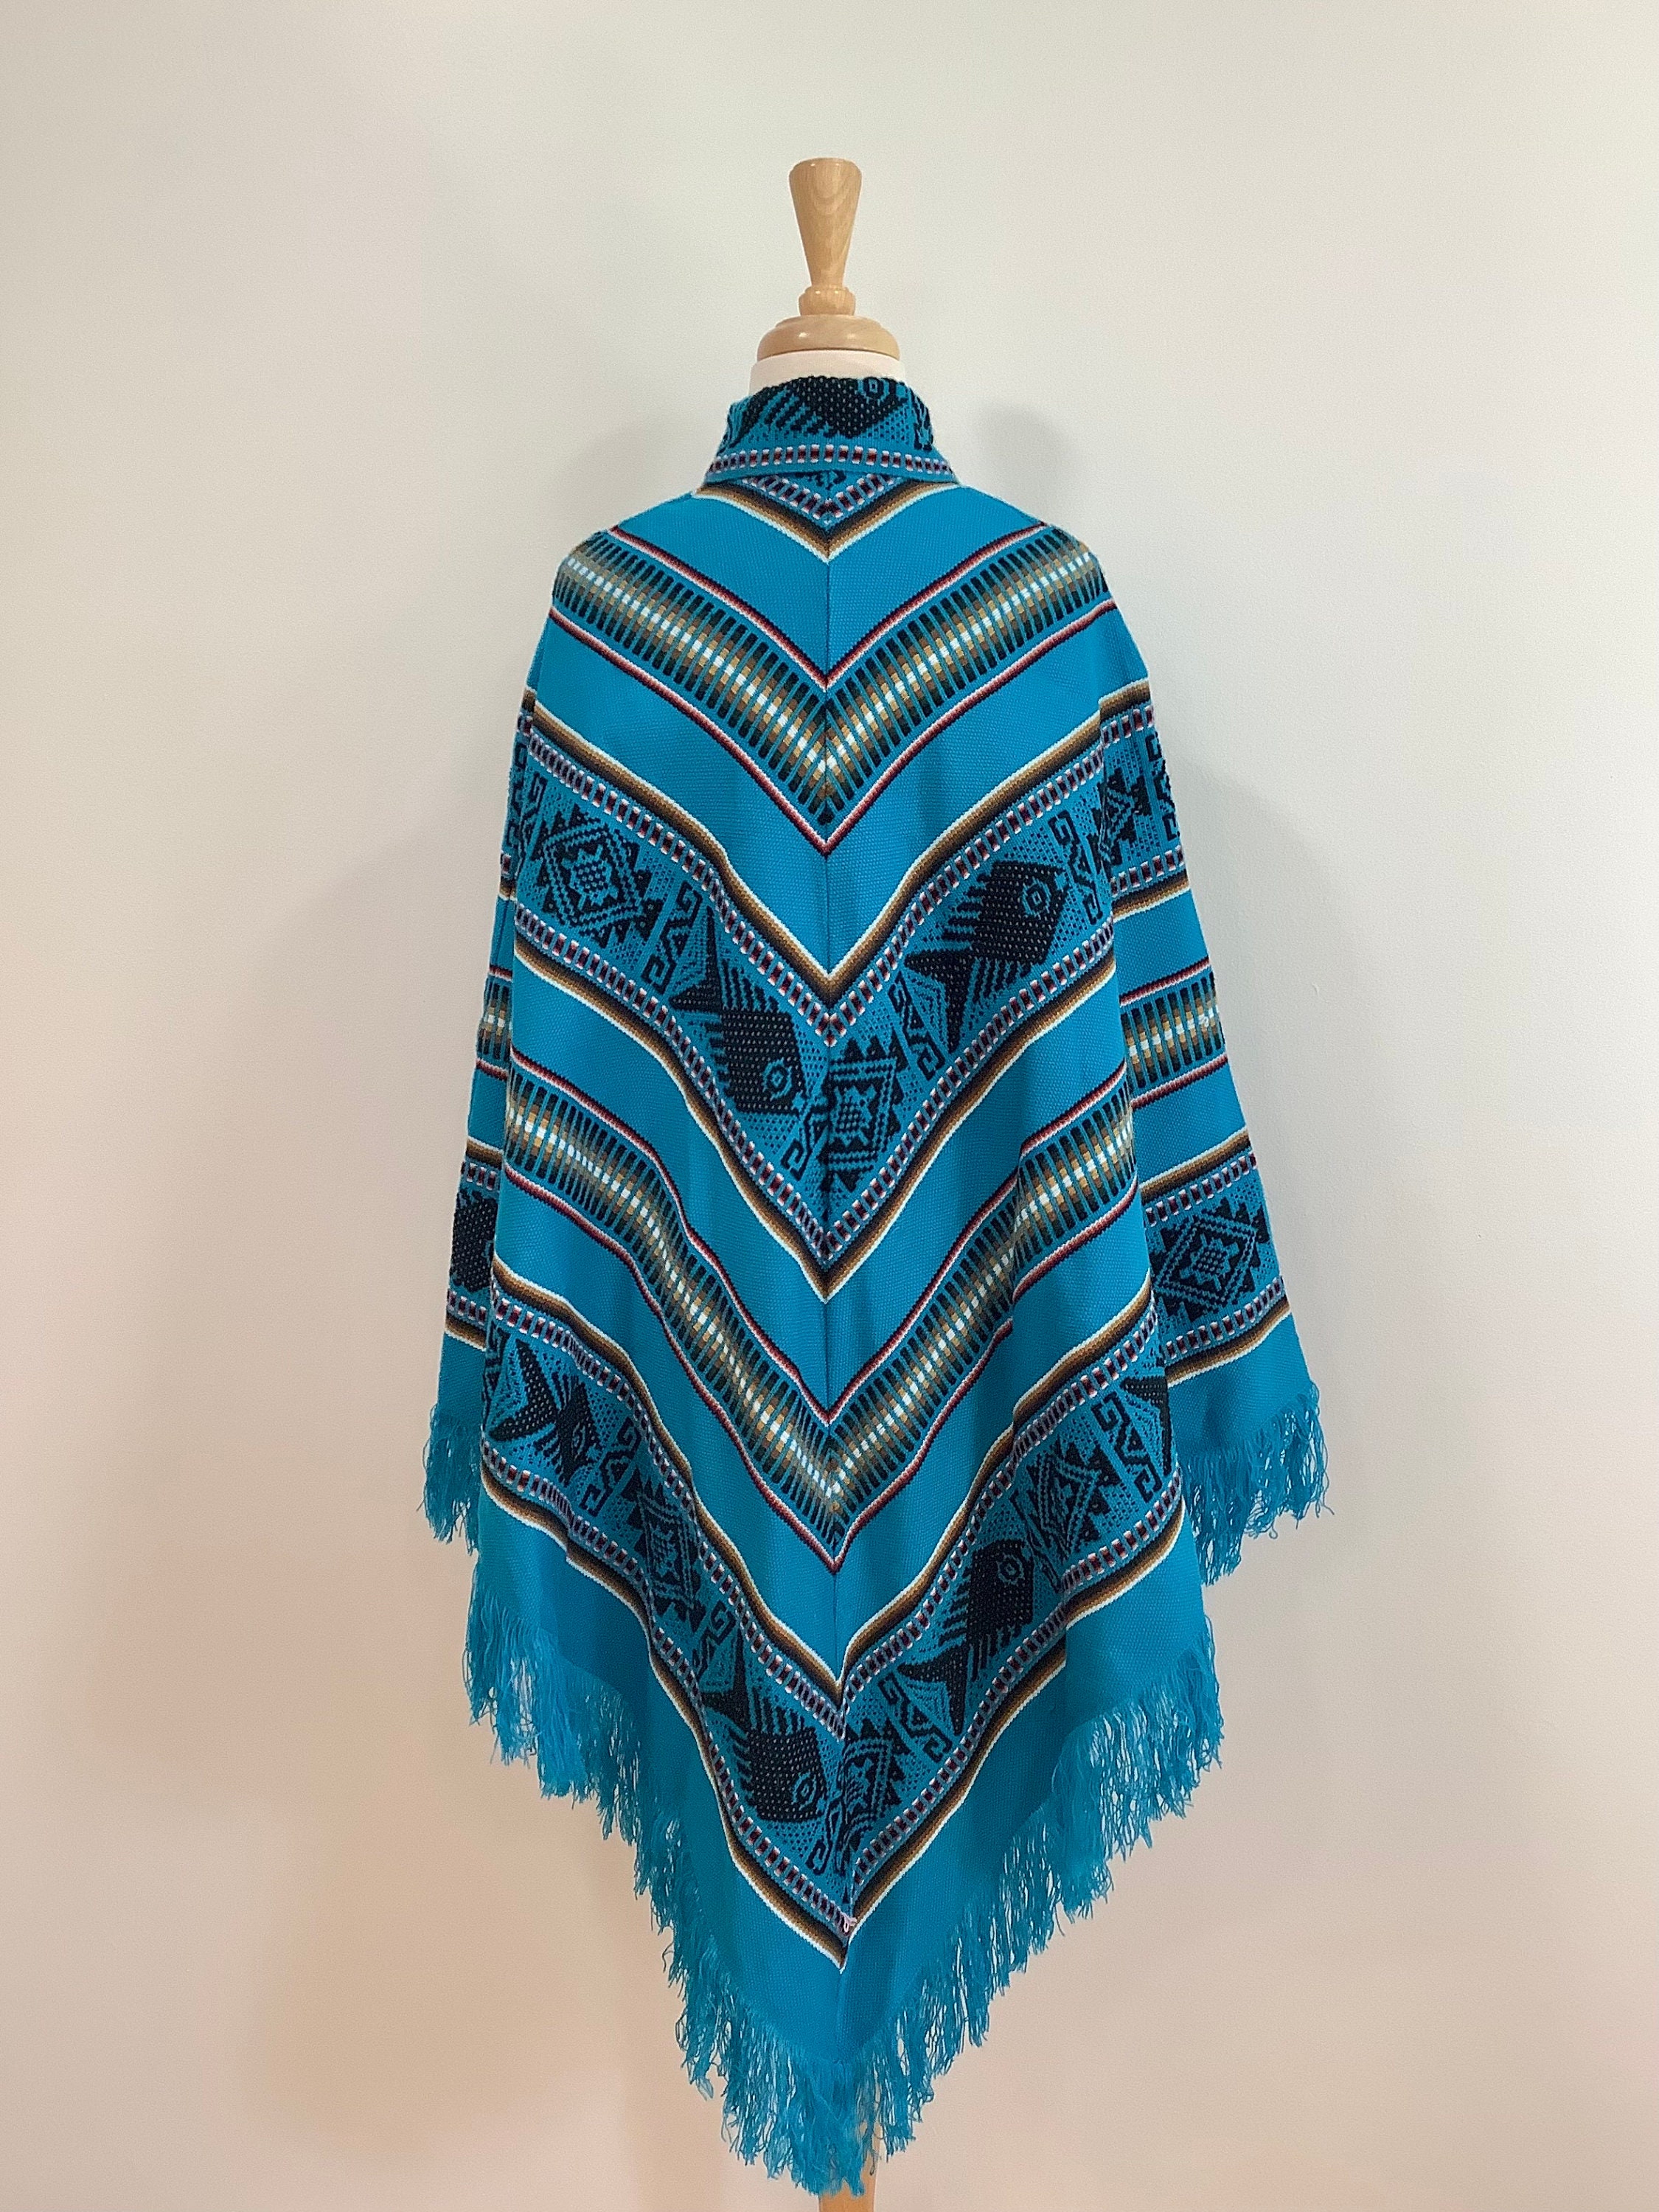 Vintage Pisces Tapestry Poncho Loom Woven Fish Hippie Boho